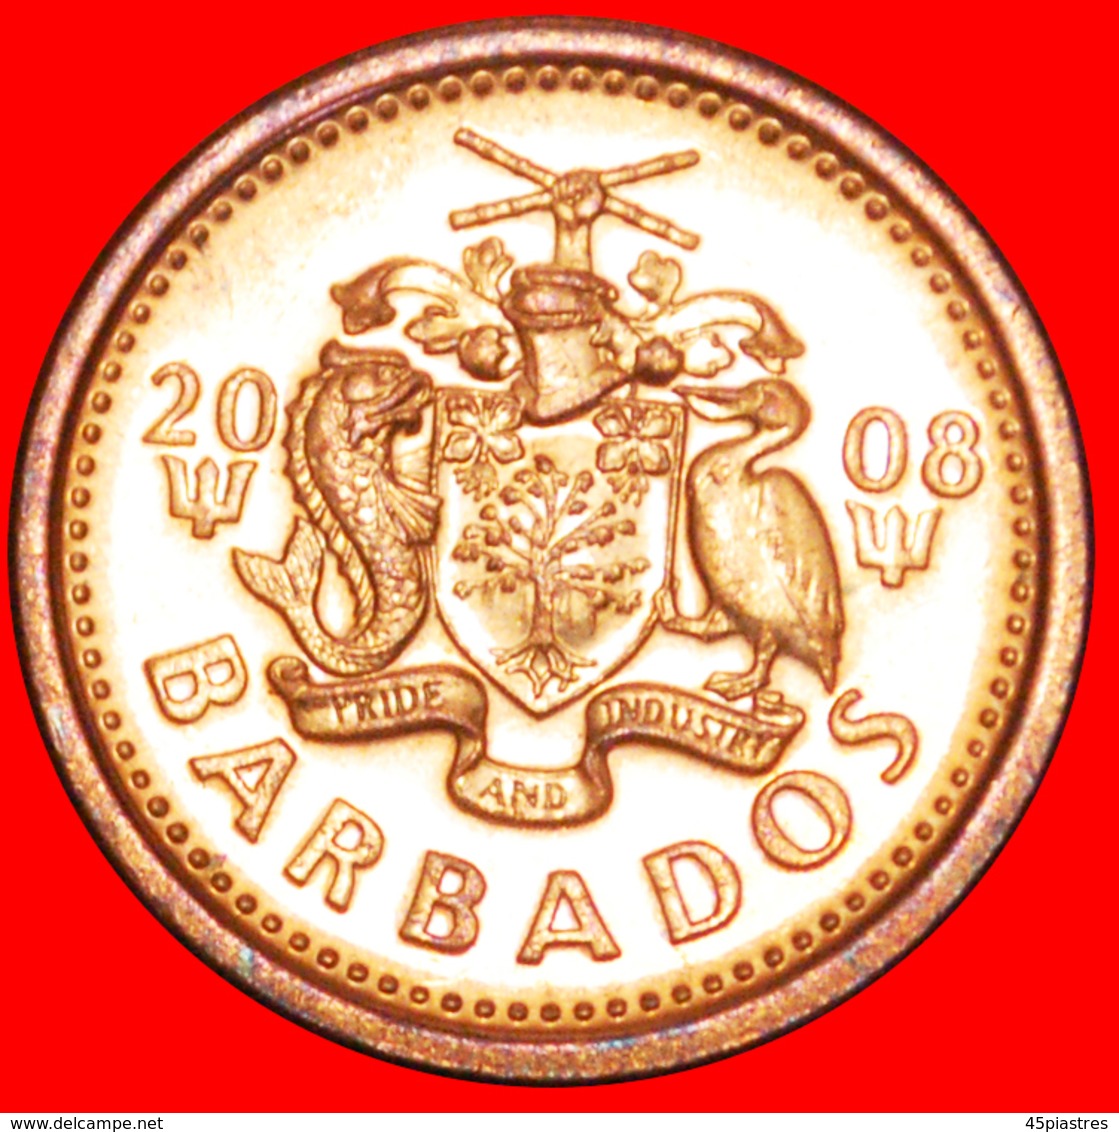 + GREAT BRITAIN (2007-2012): BARBADOS ★ 1 CENT 2008 MINT LUSTER! LOW START ★ NO RESERVE! - Barbades